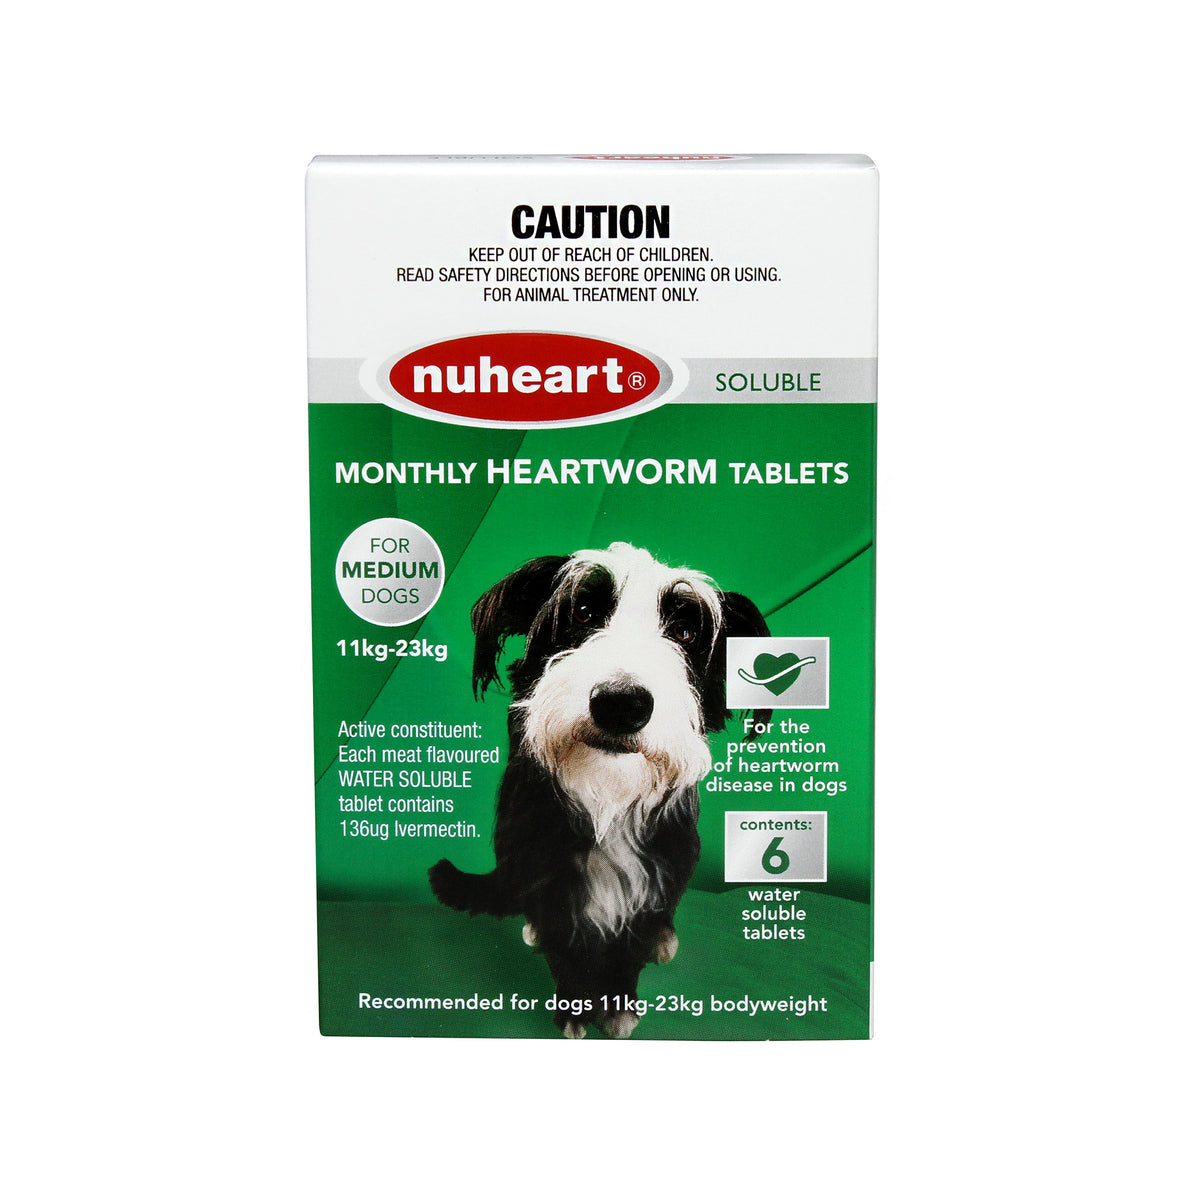 Nuheart Soluble Monthly Heartworm Tablets